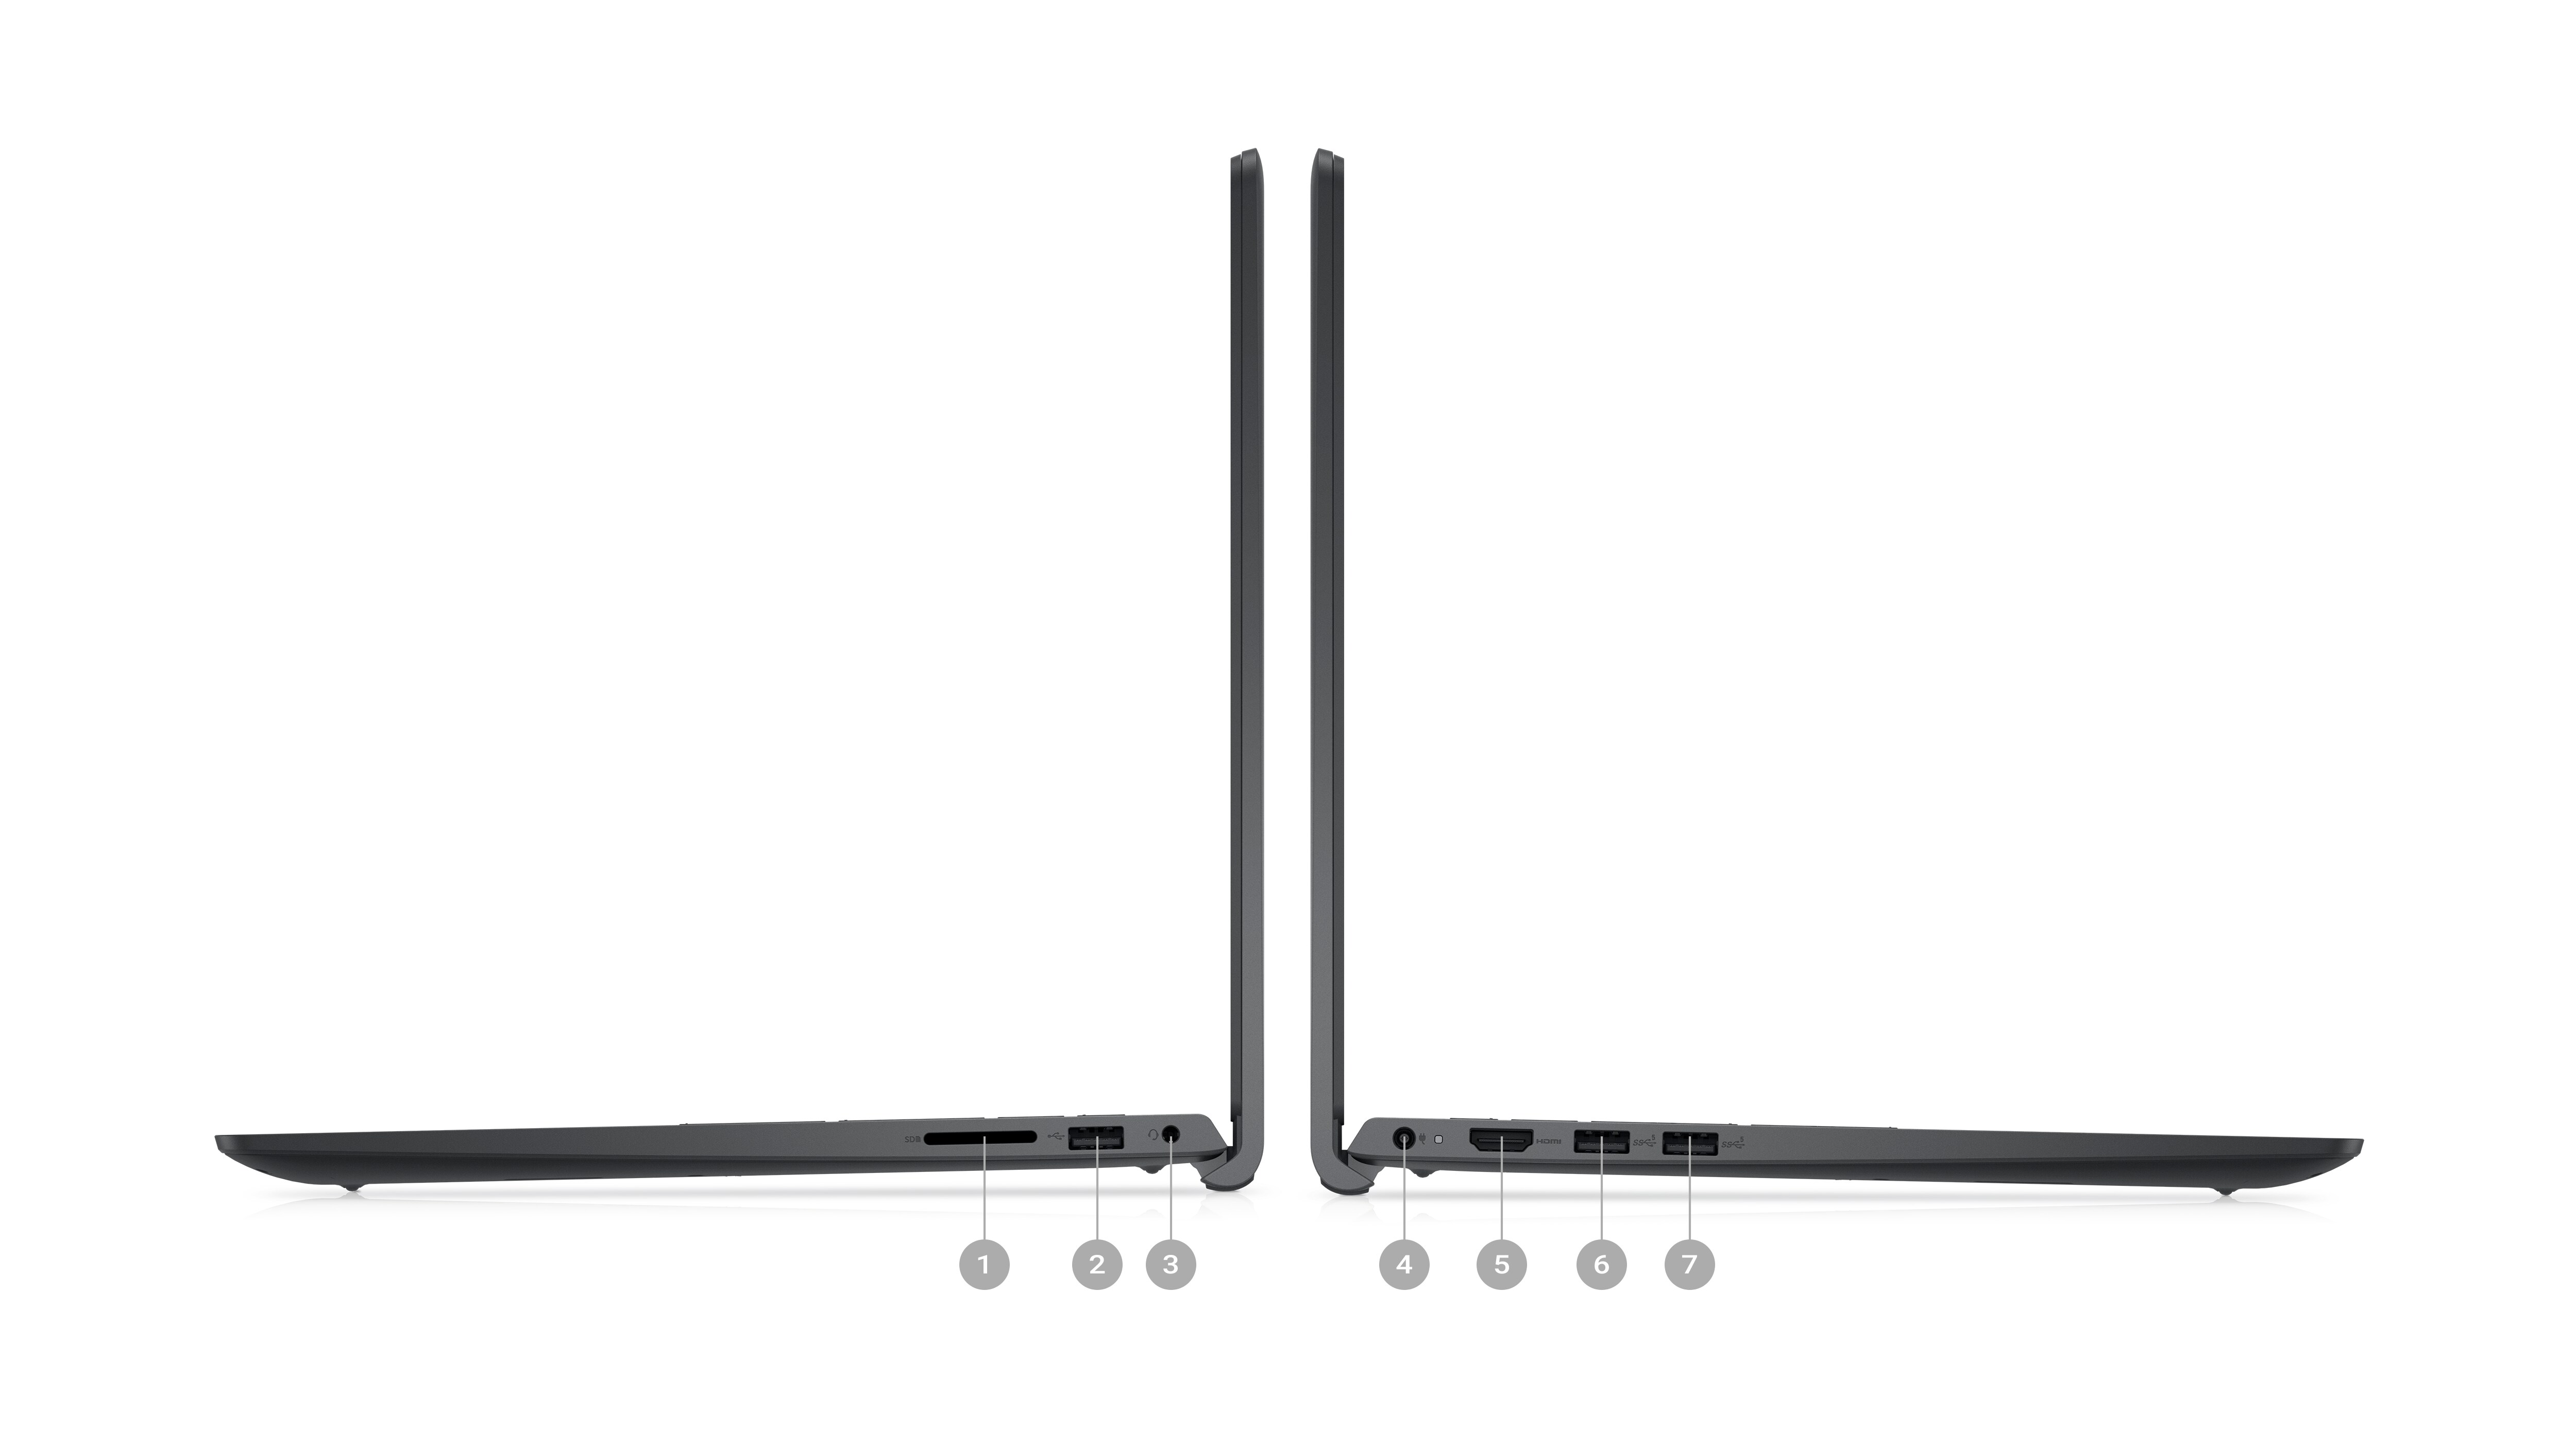 Picture of two Dell Inspiron 15 3525 laptops placed sideways with numbers from 1 to 7 signaling the product ports. 